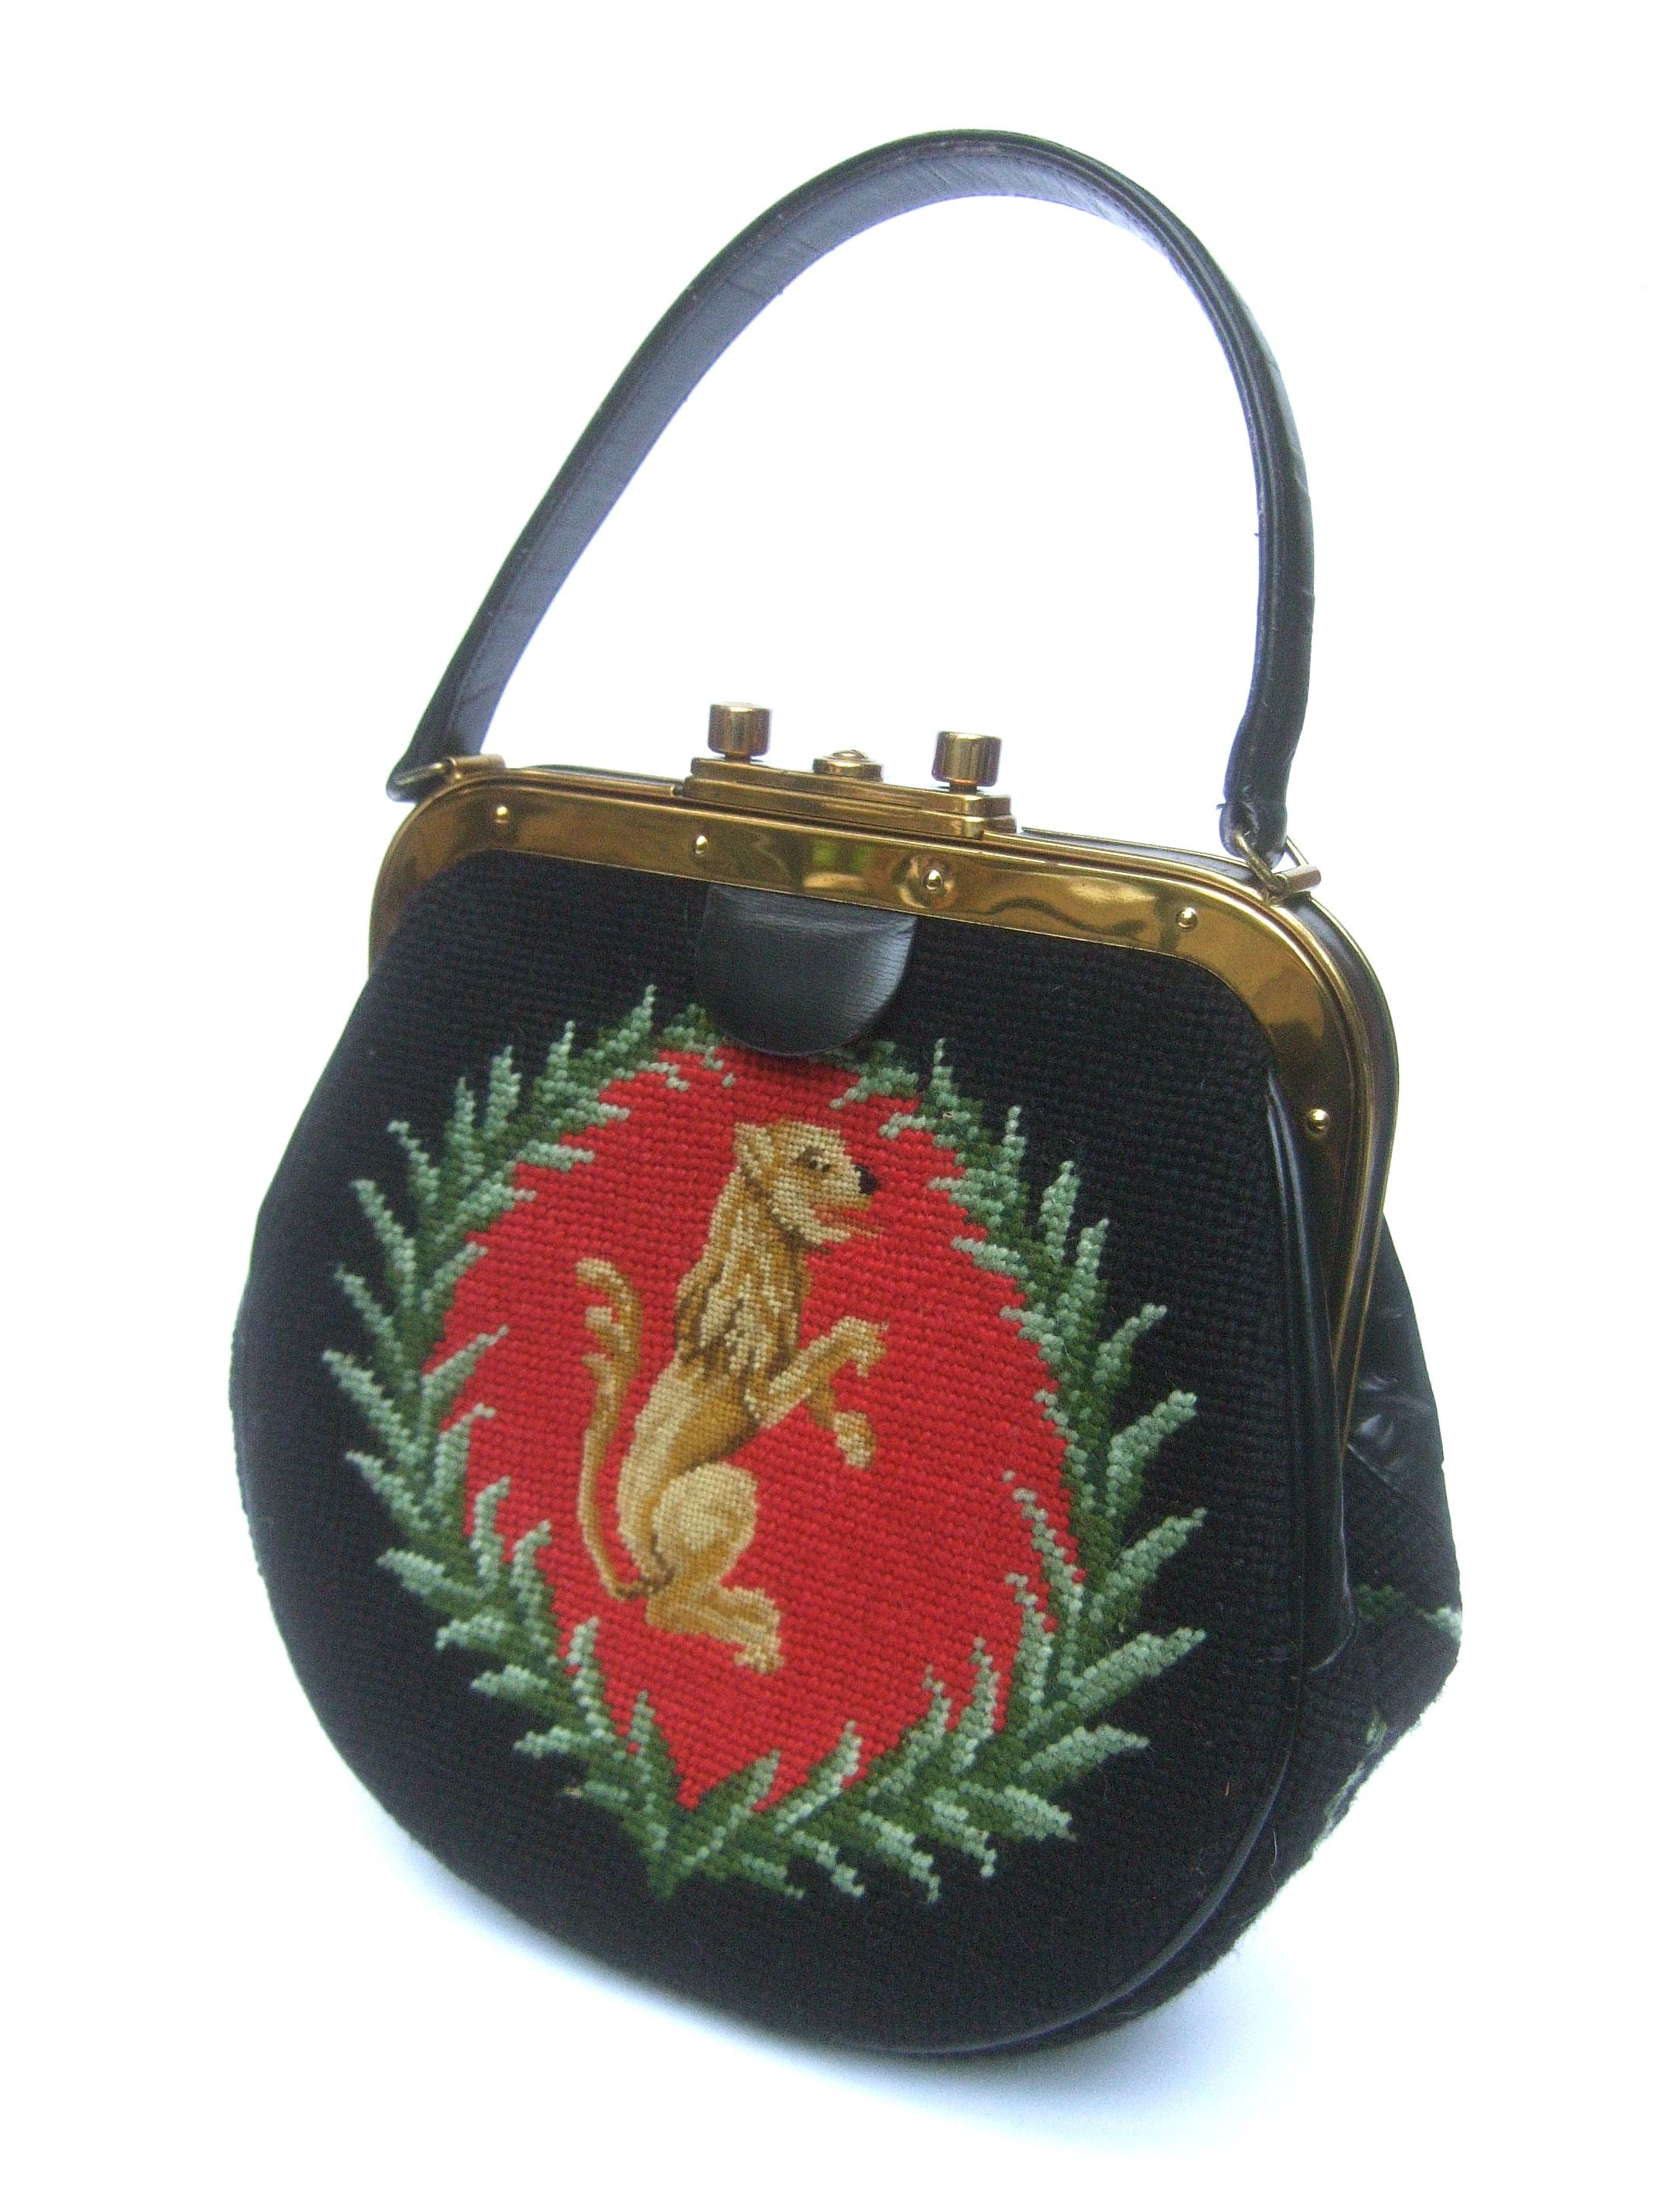 Needlepoint Artisan Griffin & Laurels Hand Stitched Handbag c 1970 In Good Condition For Sale In University City, MO